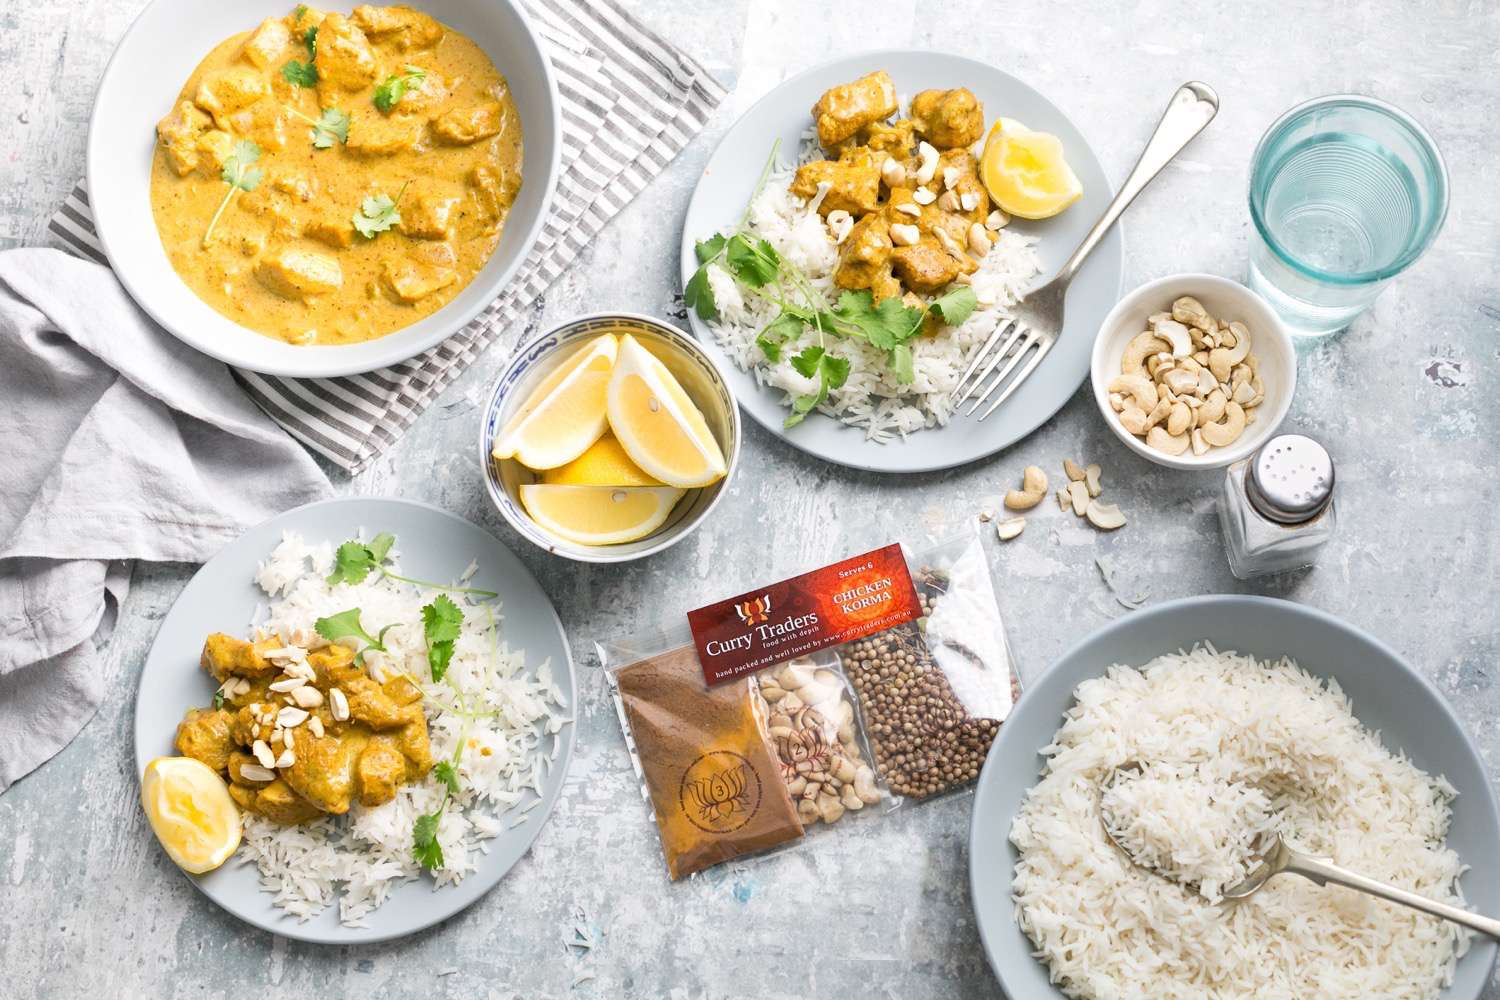 Cook Chicken Korma at home with easy kit